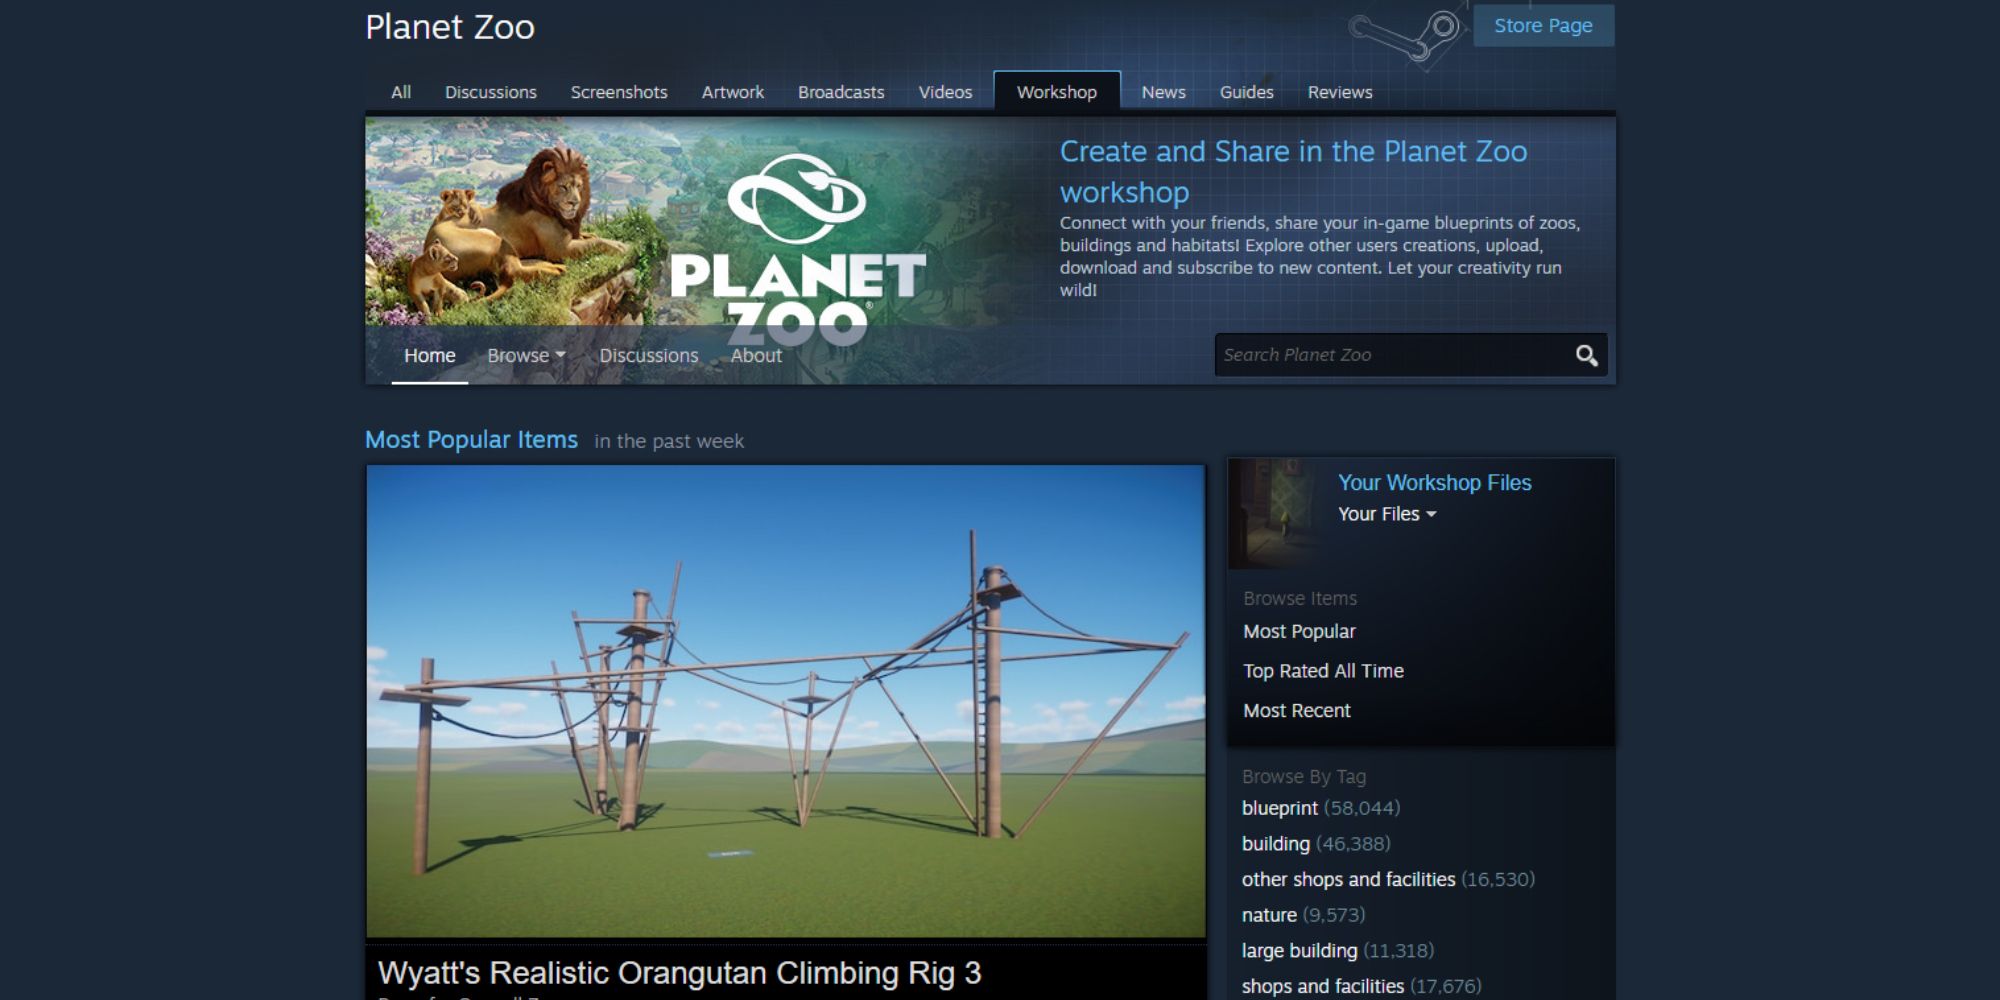 how do you download items from the steam workshop